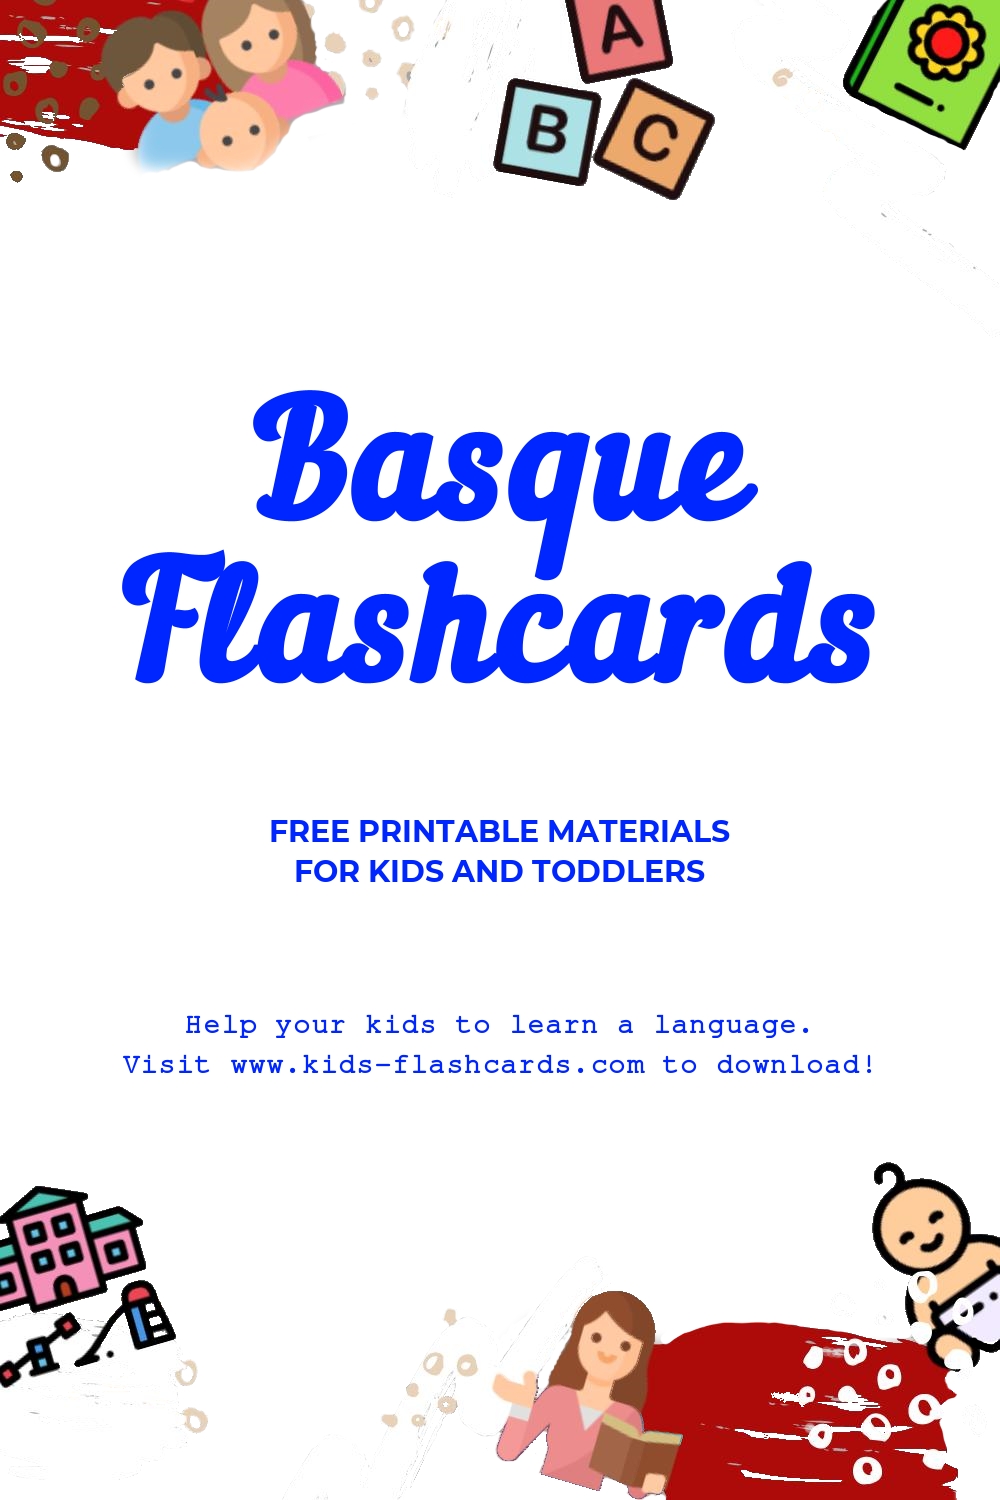 Worksheets to learn Basque language